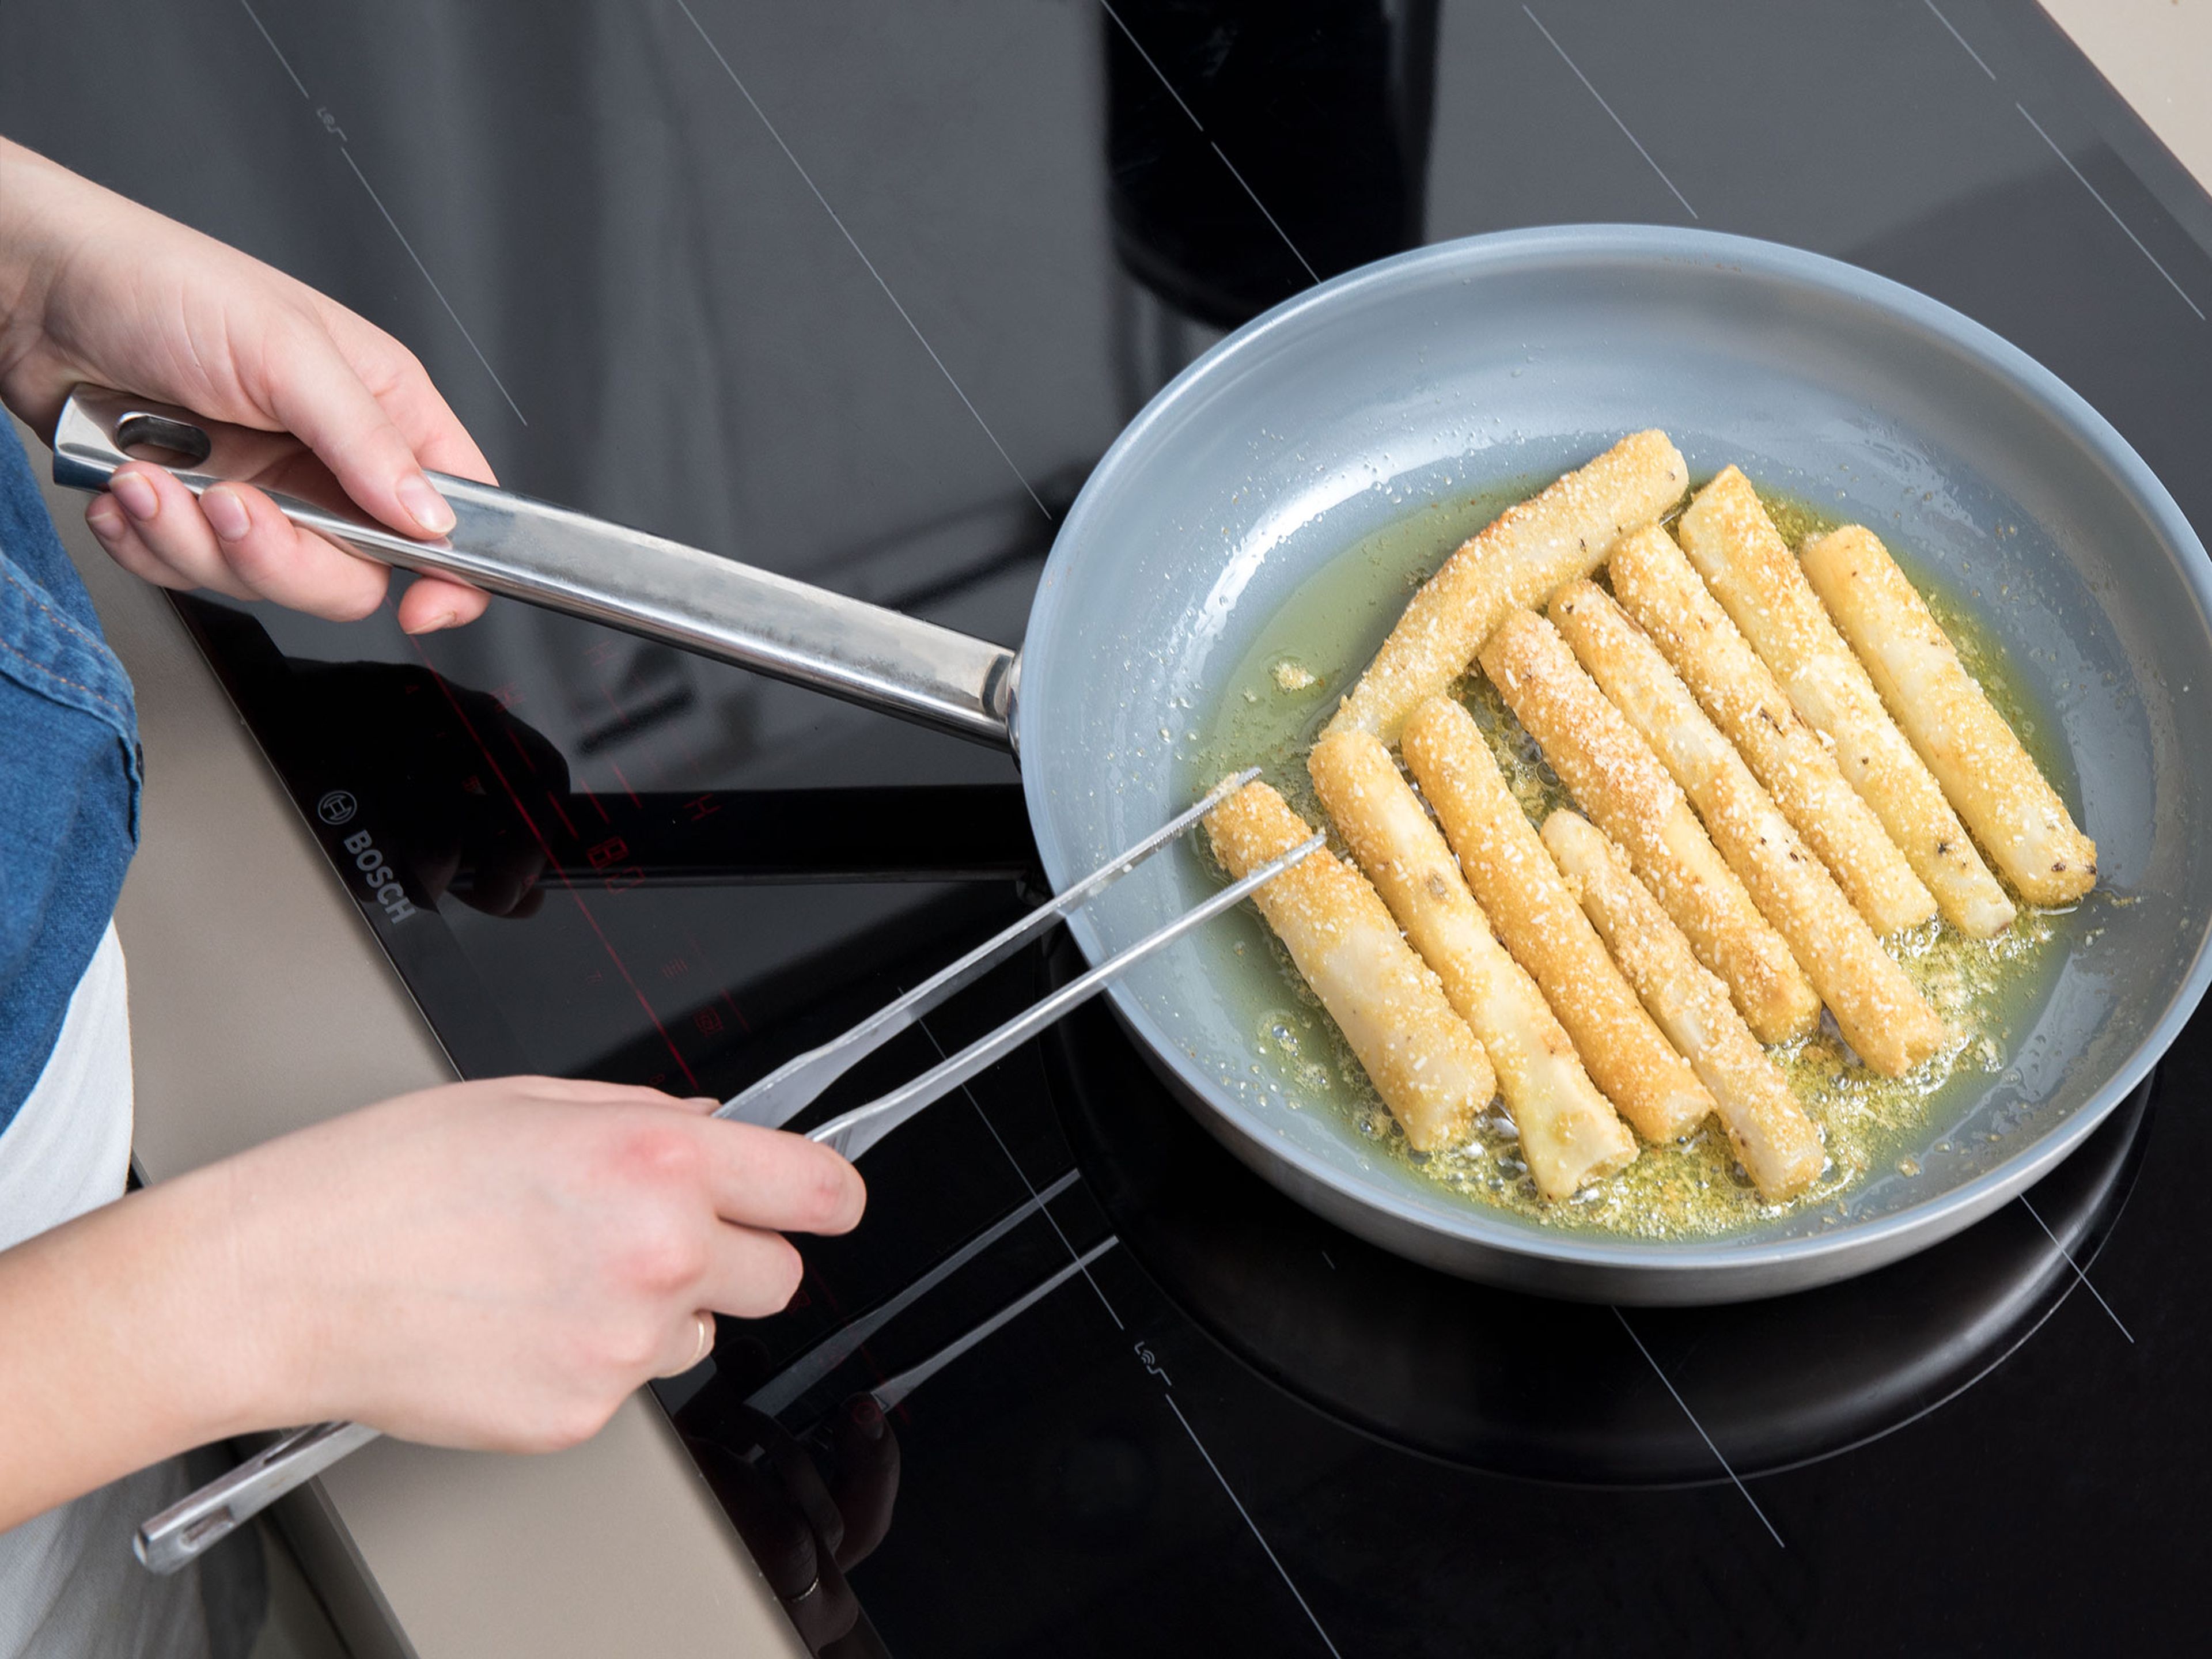 To prepare the fries, crack an egg into a bowl, season with salt, and whisk. Add enough oil to a large pan to shallow fry and heat over medium heat. Working in batches, dredge the sliced salsifies in the egg mixture, and then in rice-breadcrumbs, and transfer to the frying pan. Fry until golden all over.